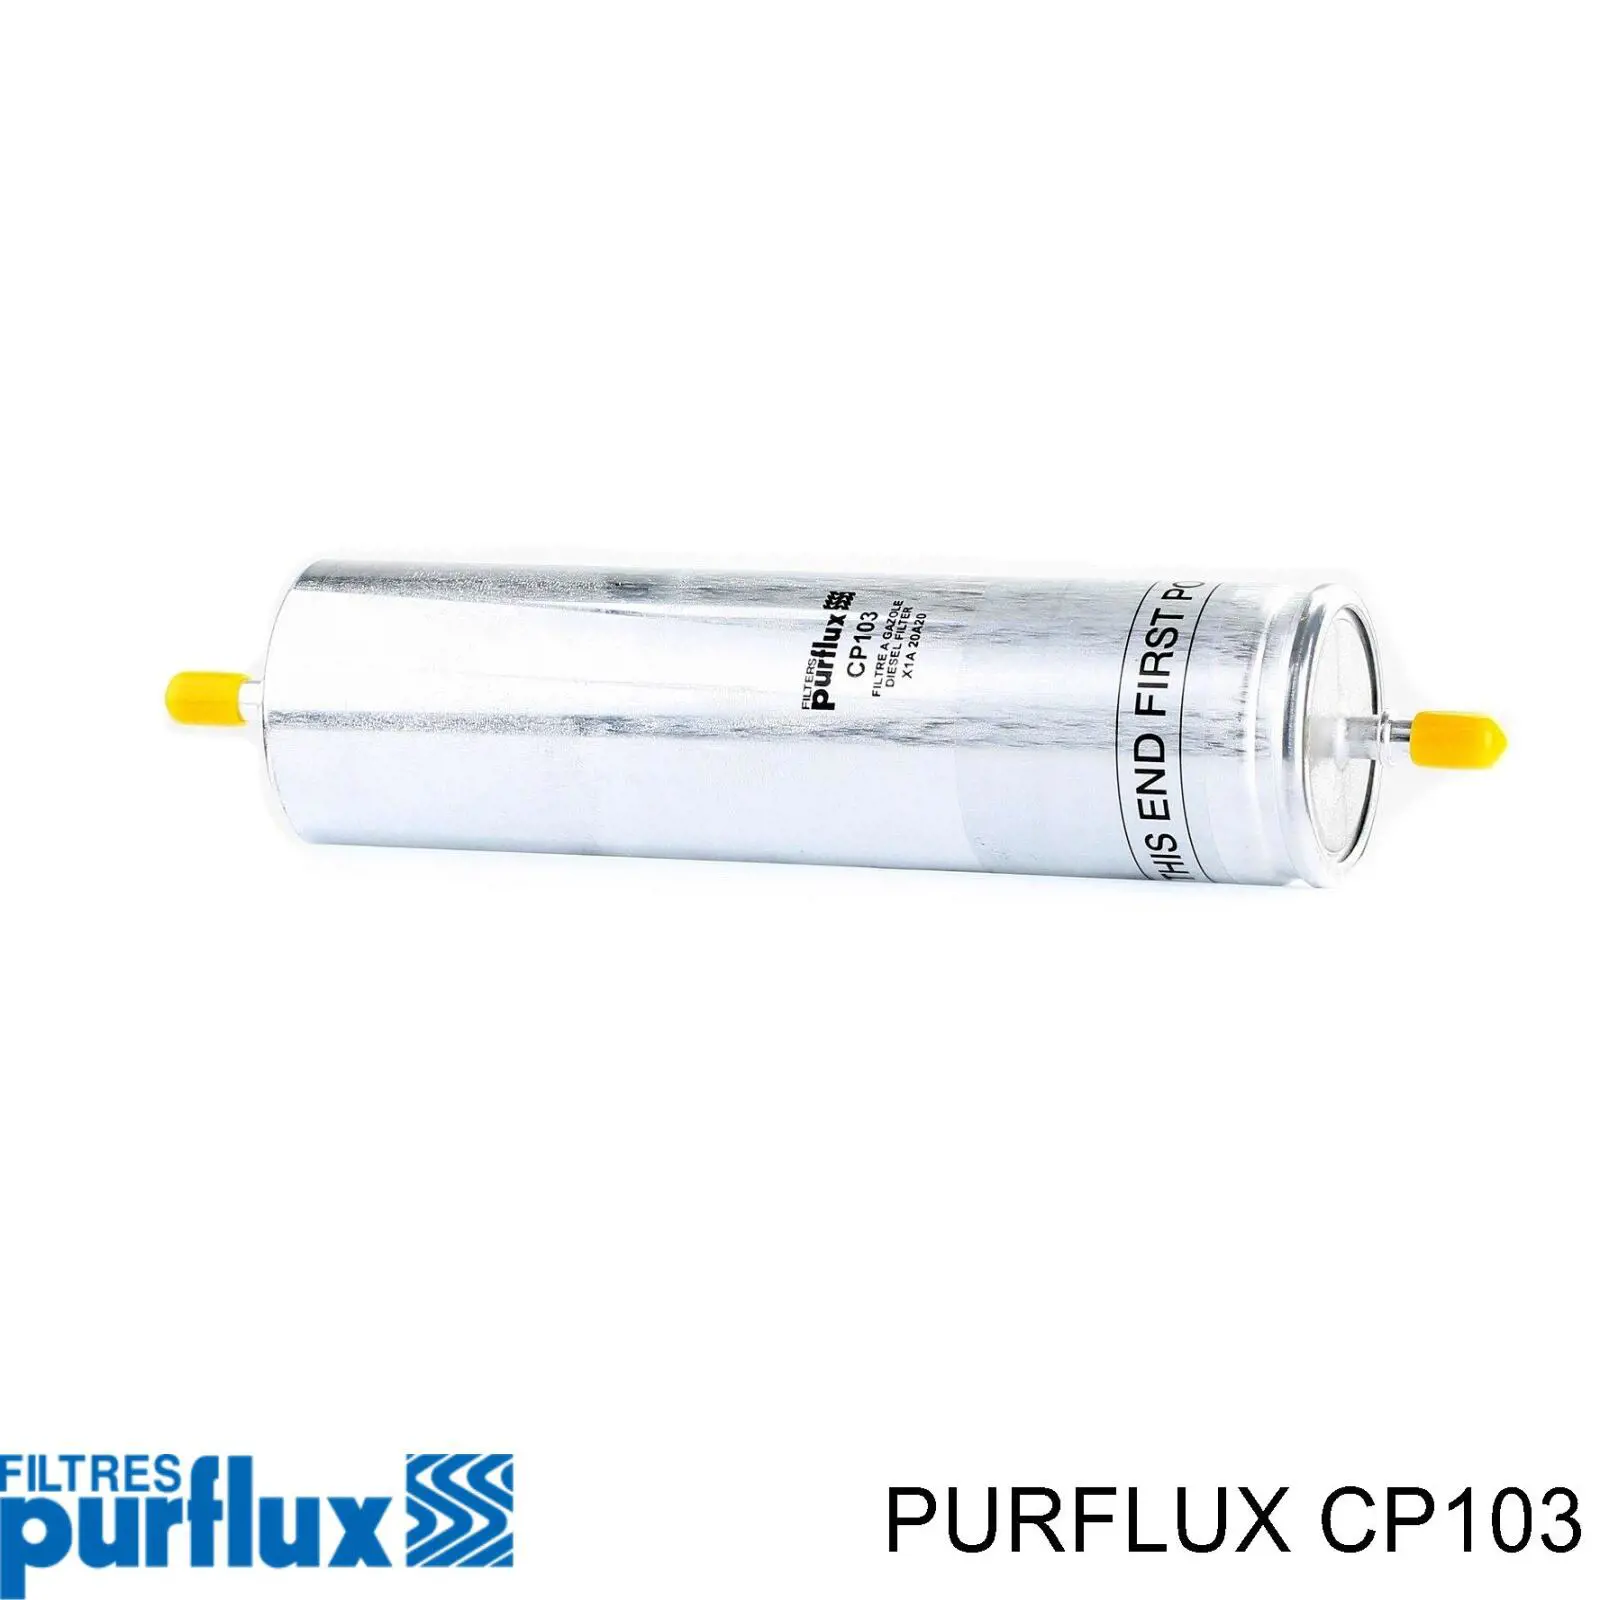 CP103 Purflux filtro combustible